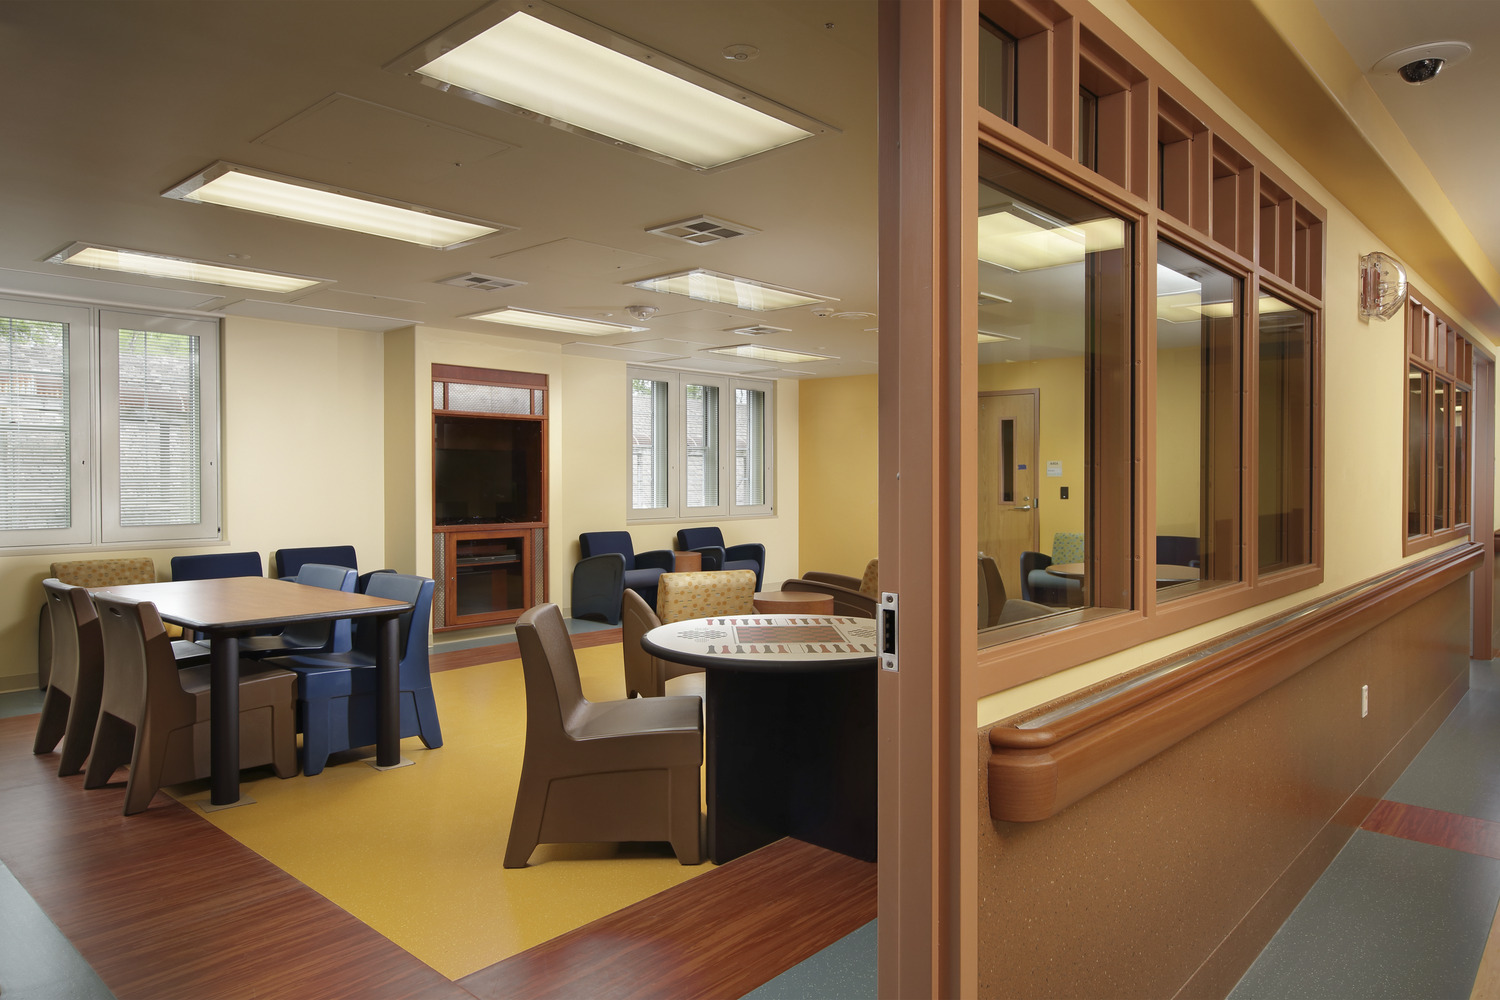 Image shows a lobby at the Children’s Institute Behavioral Health Clinic in Pittsburgh, PA. The room is done in calming tones of yellow, brown, and blue. There are chairs around tables in a lobby setting.